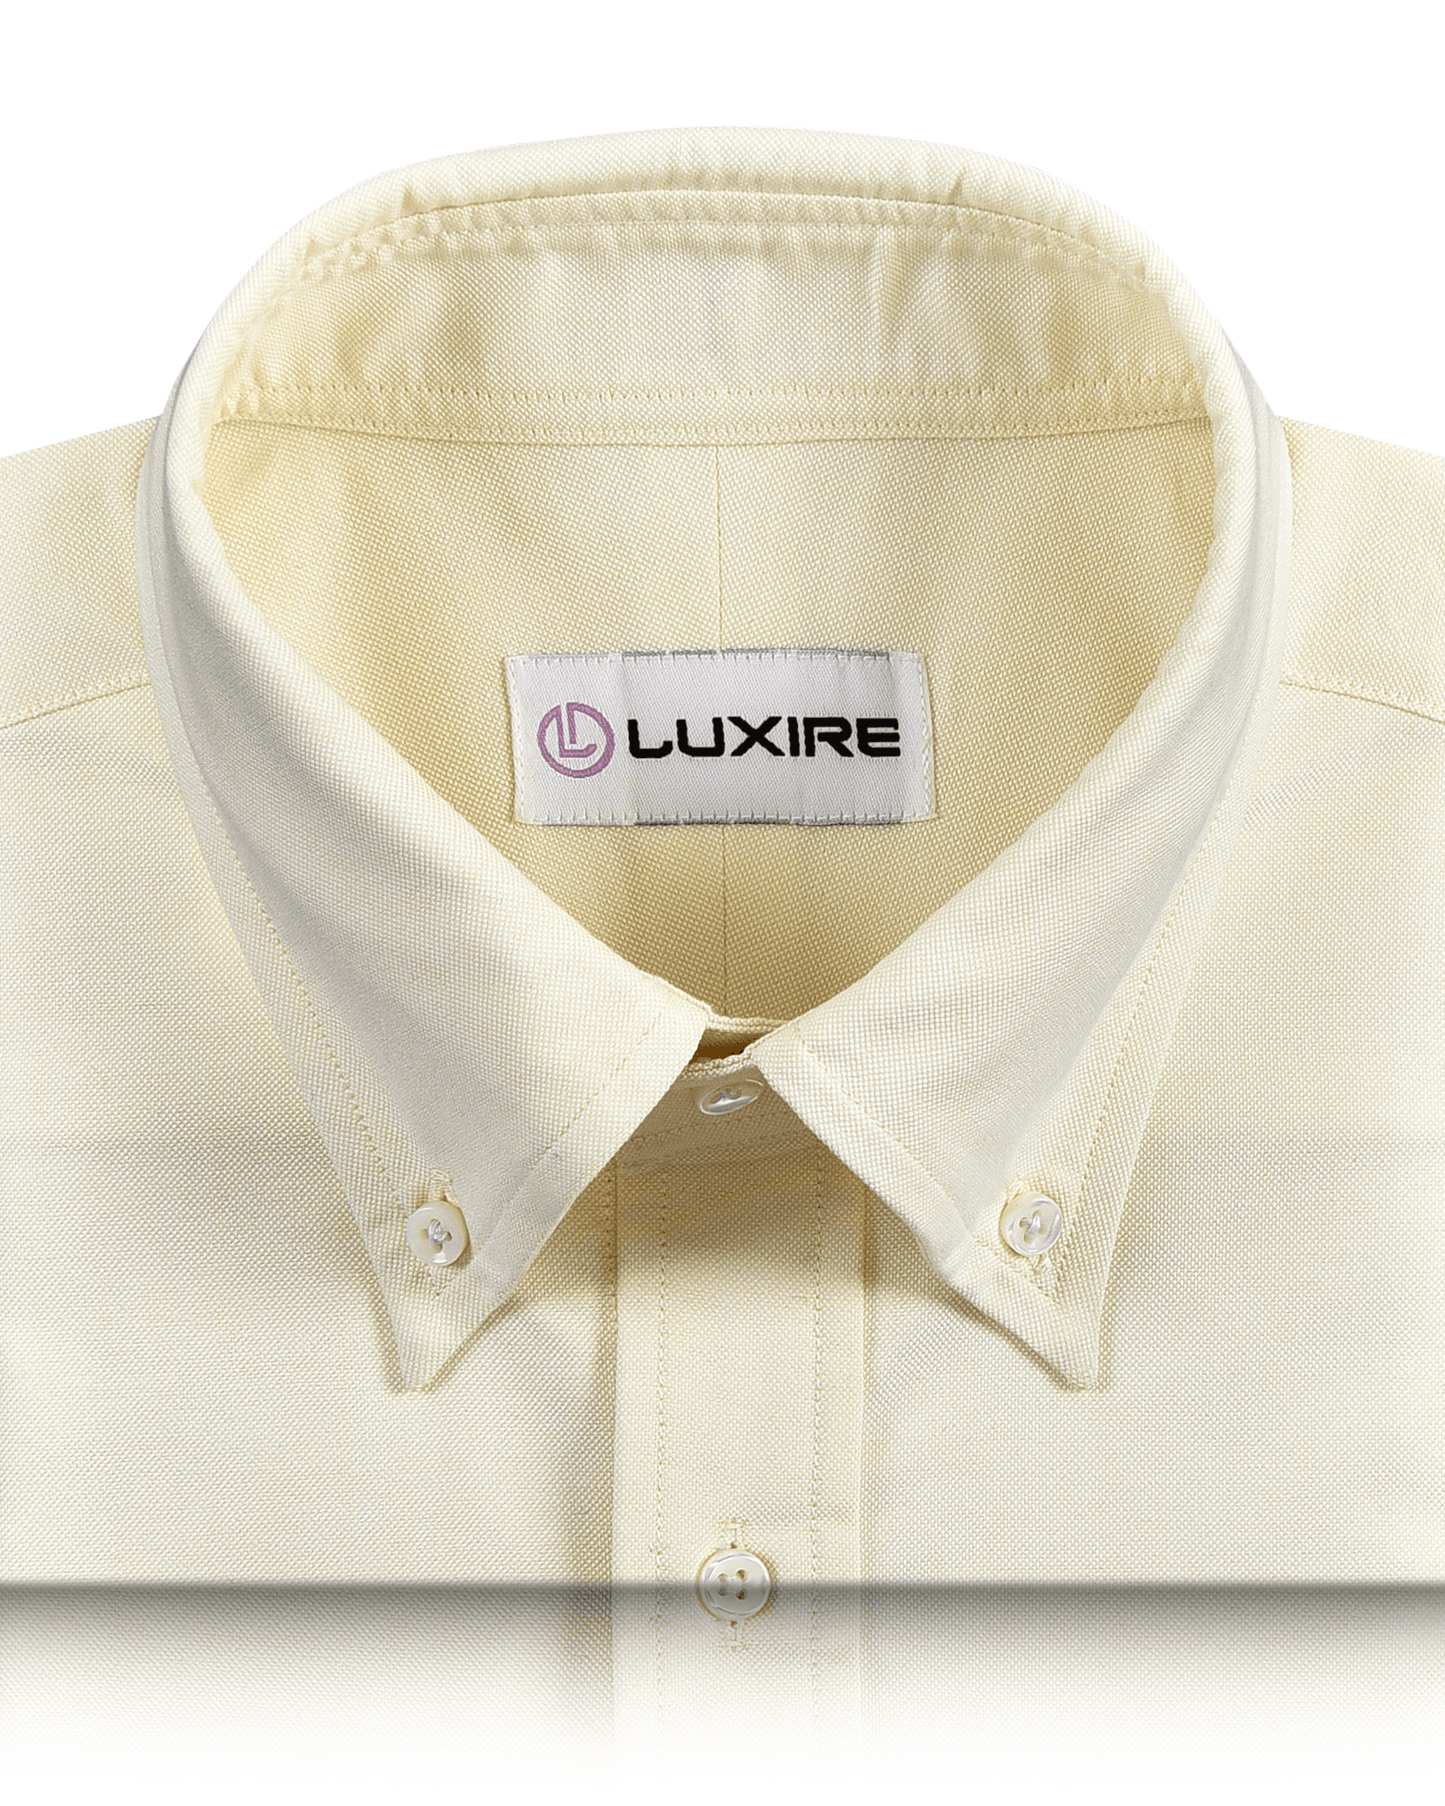 Collar of the custom oxford shirt for men by Luxire in pale yellow